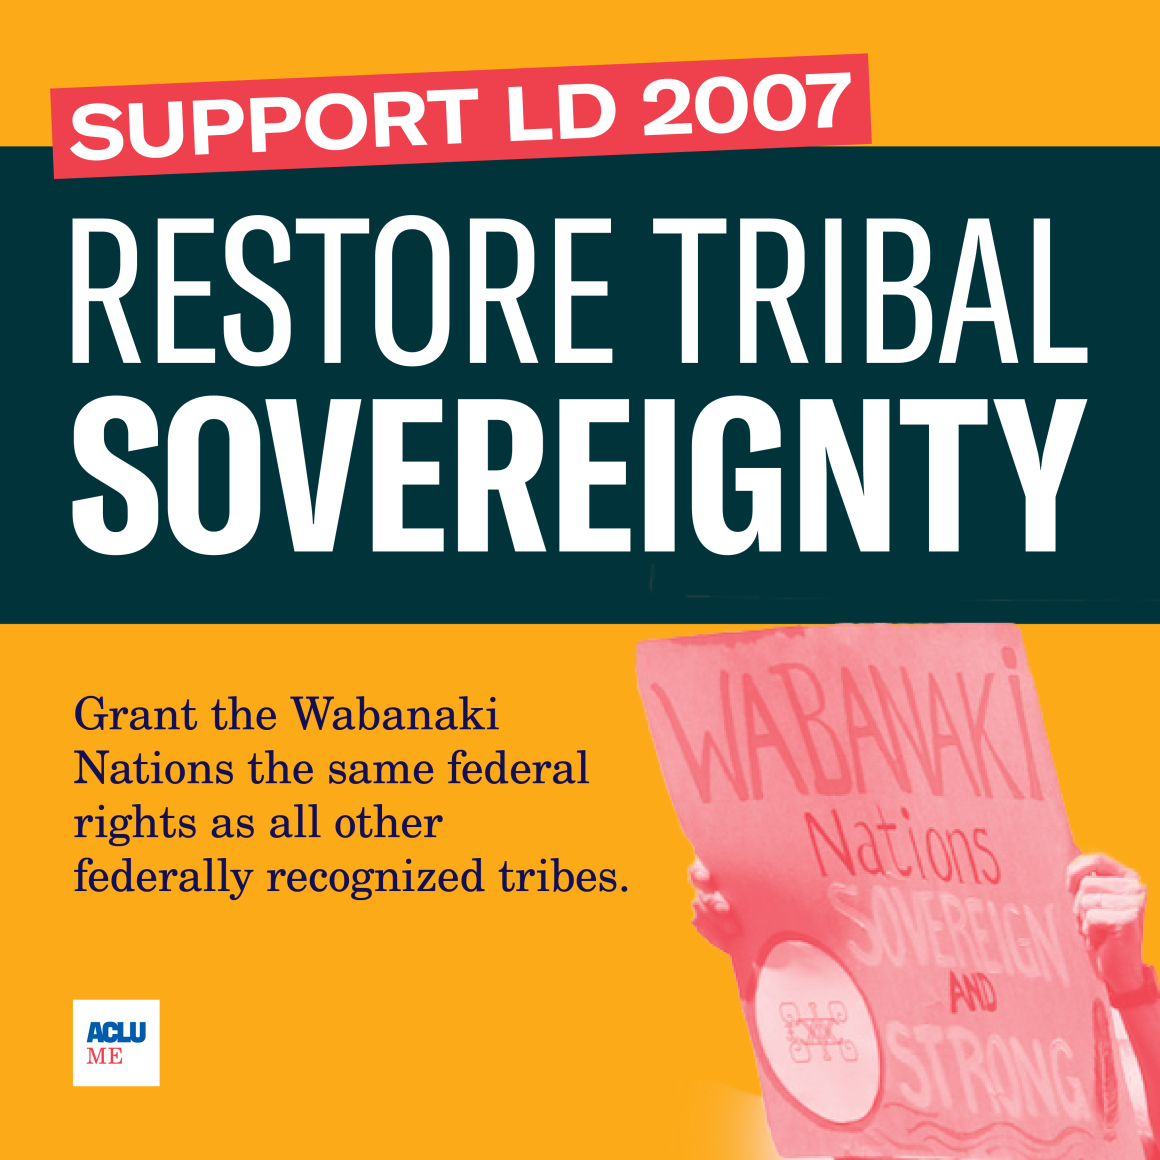 Restore Tribal Sovereignty: Support LD 2007